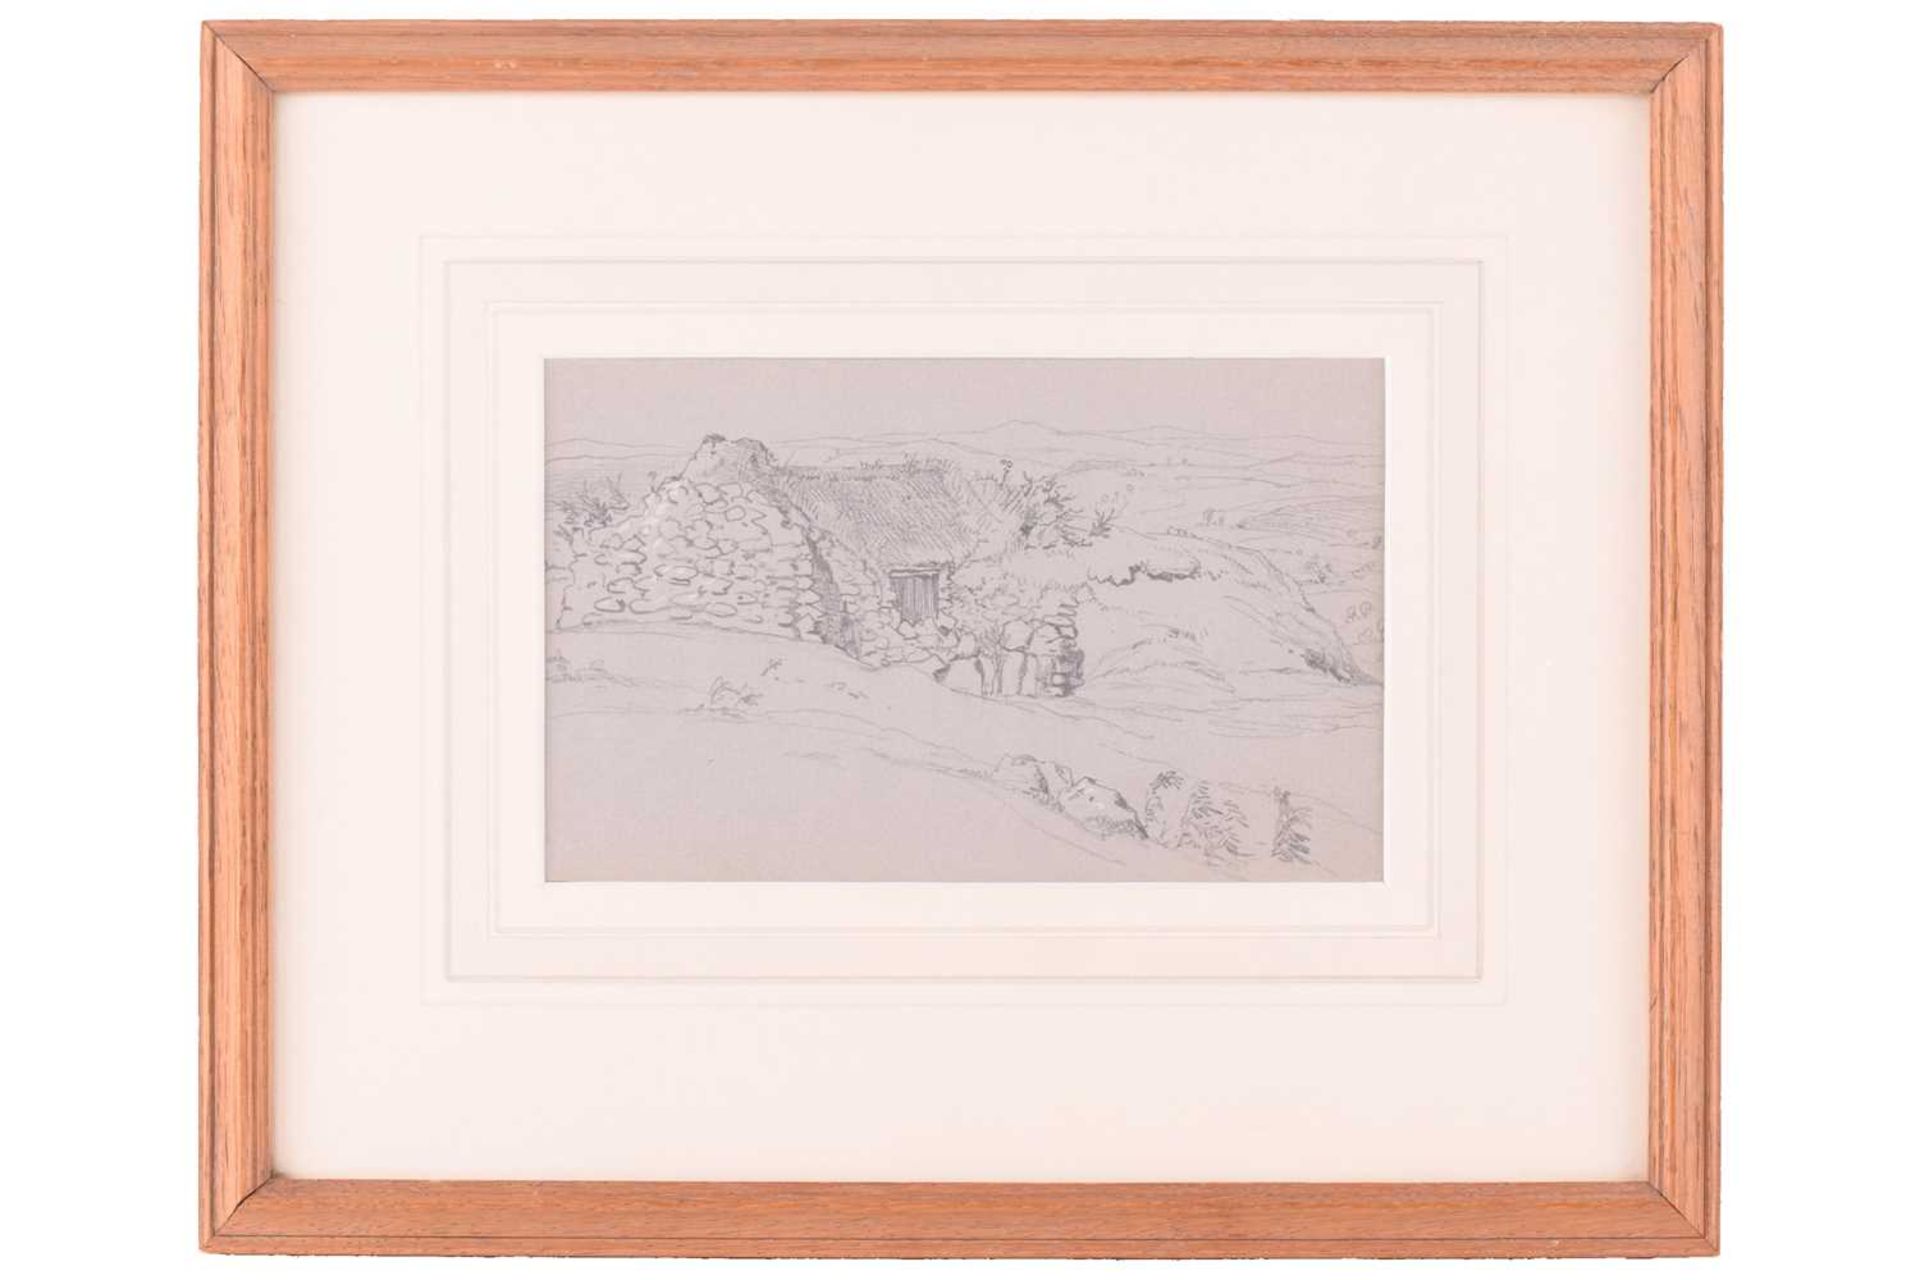 Attributed to Sir Edwin Landseer R.A. (1802-1873) 'A Highland Farm', pencil on paper, bearing Thomas